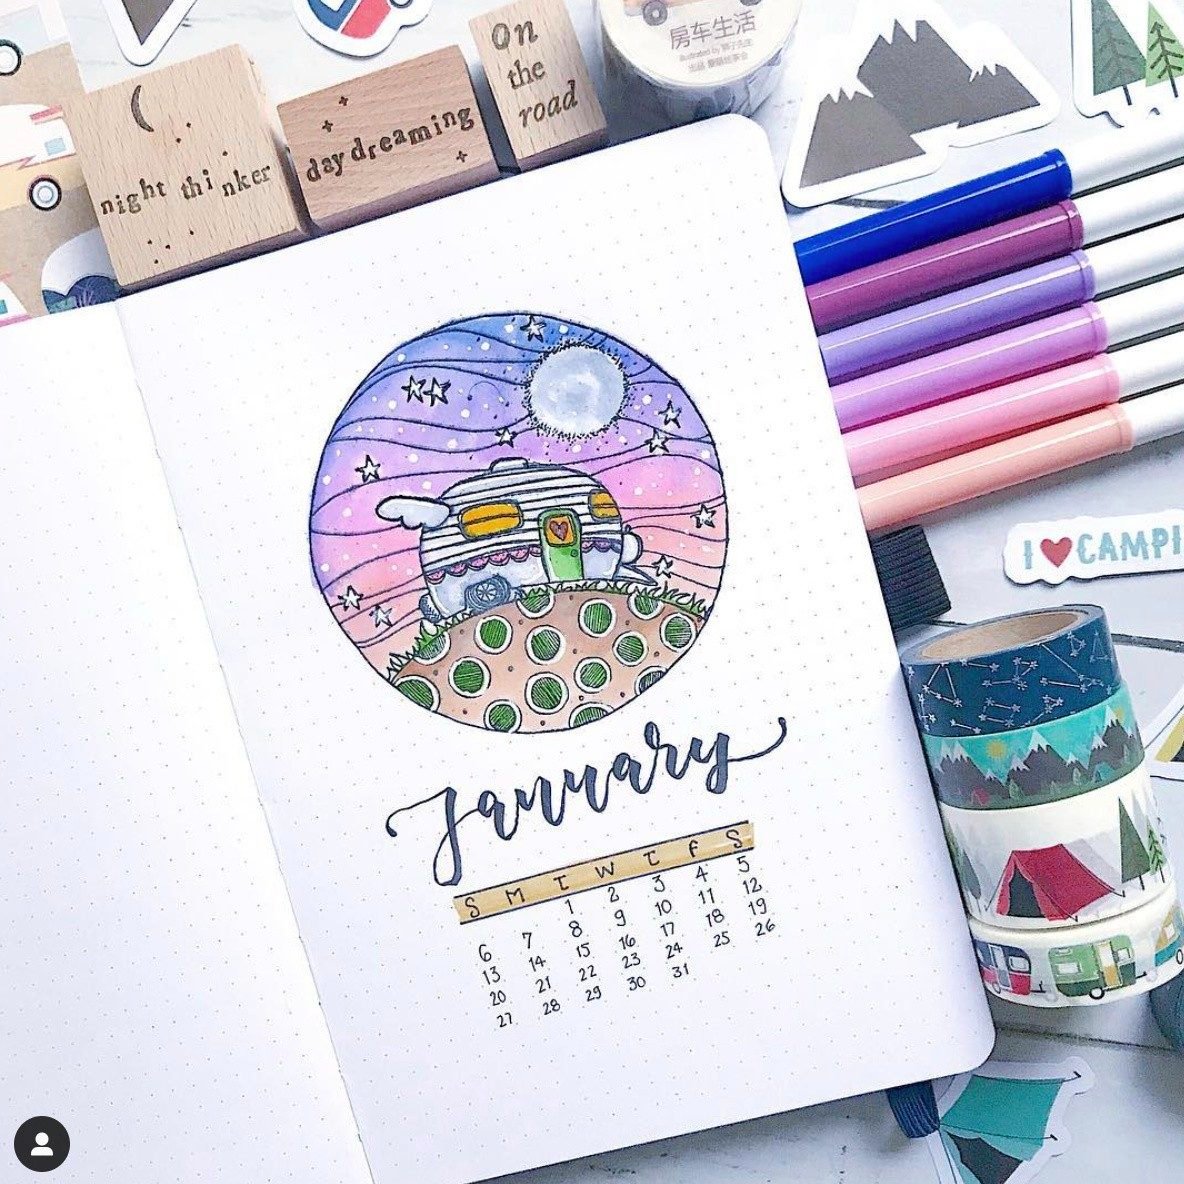 Bullet Journal Cover Page Ideas that You'll Love - The Smart Wander